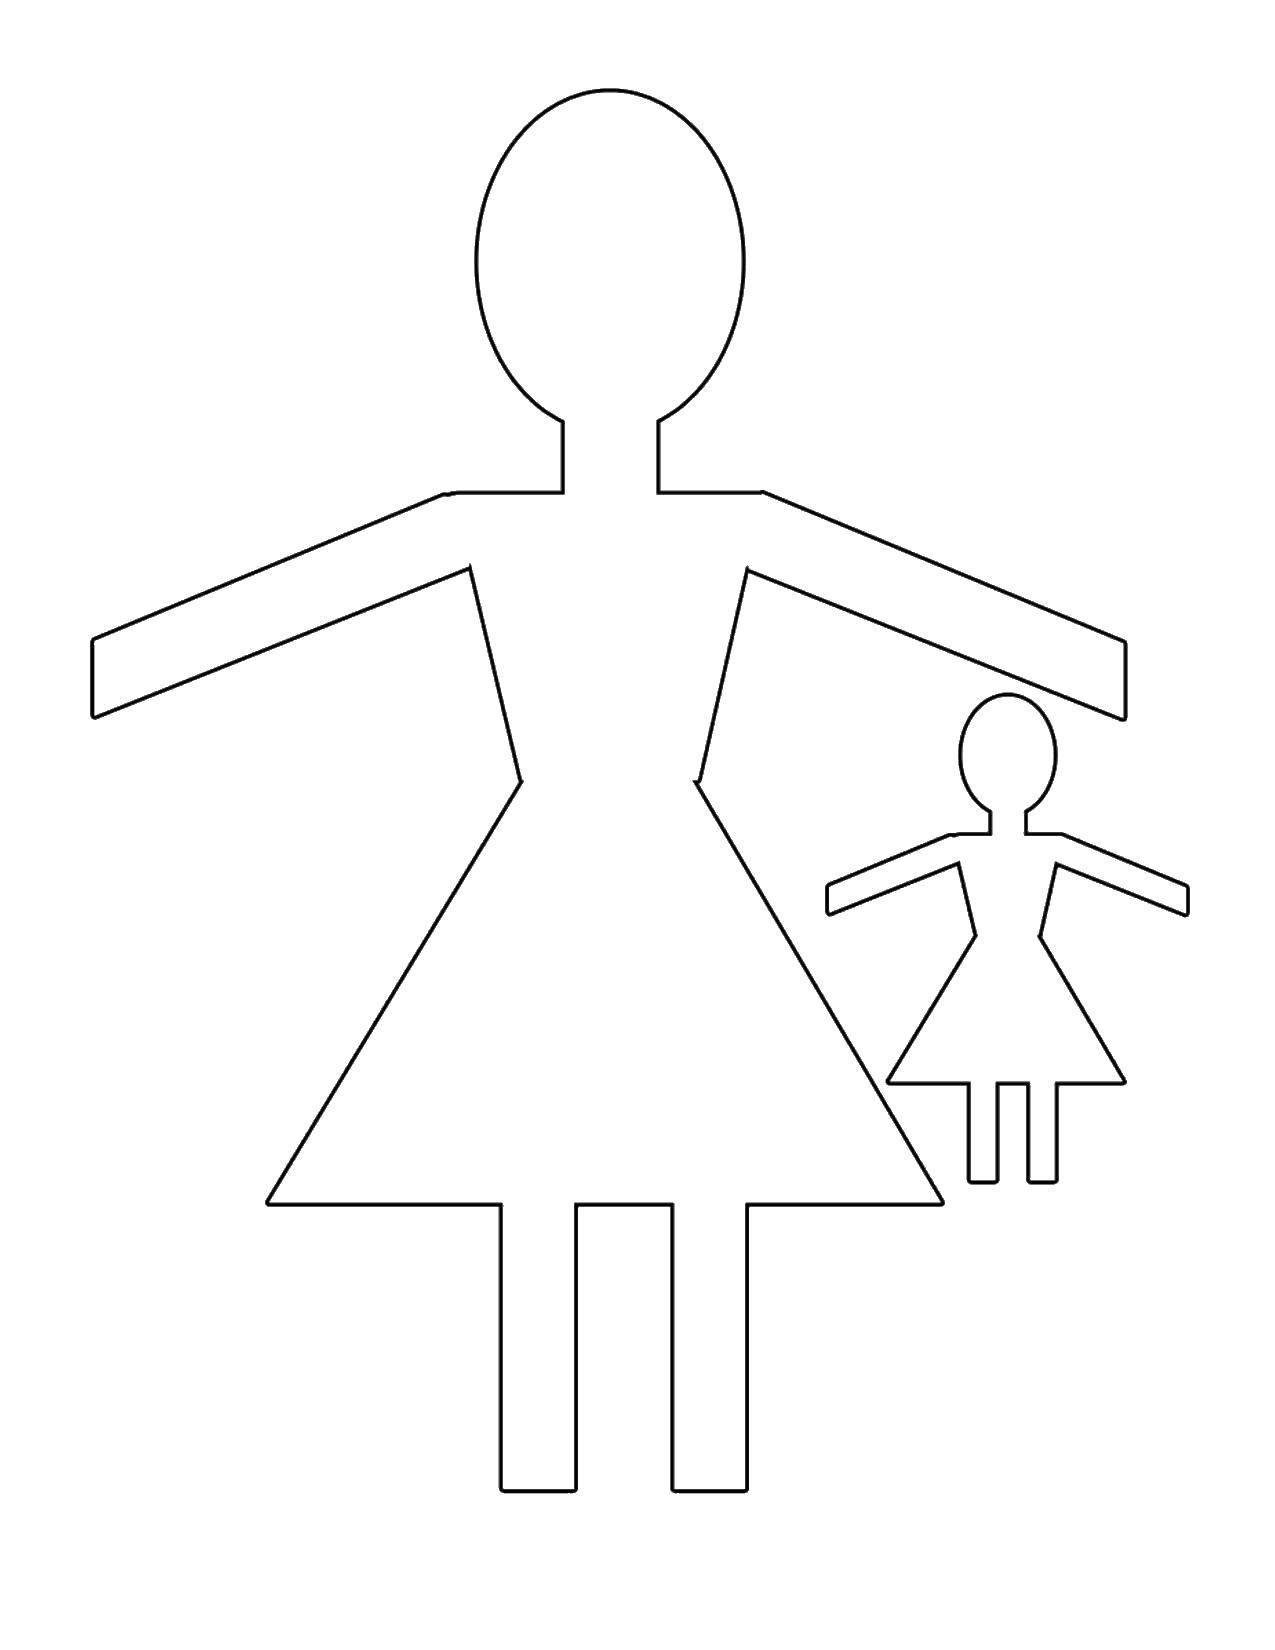 Coloring Circuit girls from the paper. Category The contour of the doll . Tags:  outline , paper, skirt.